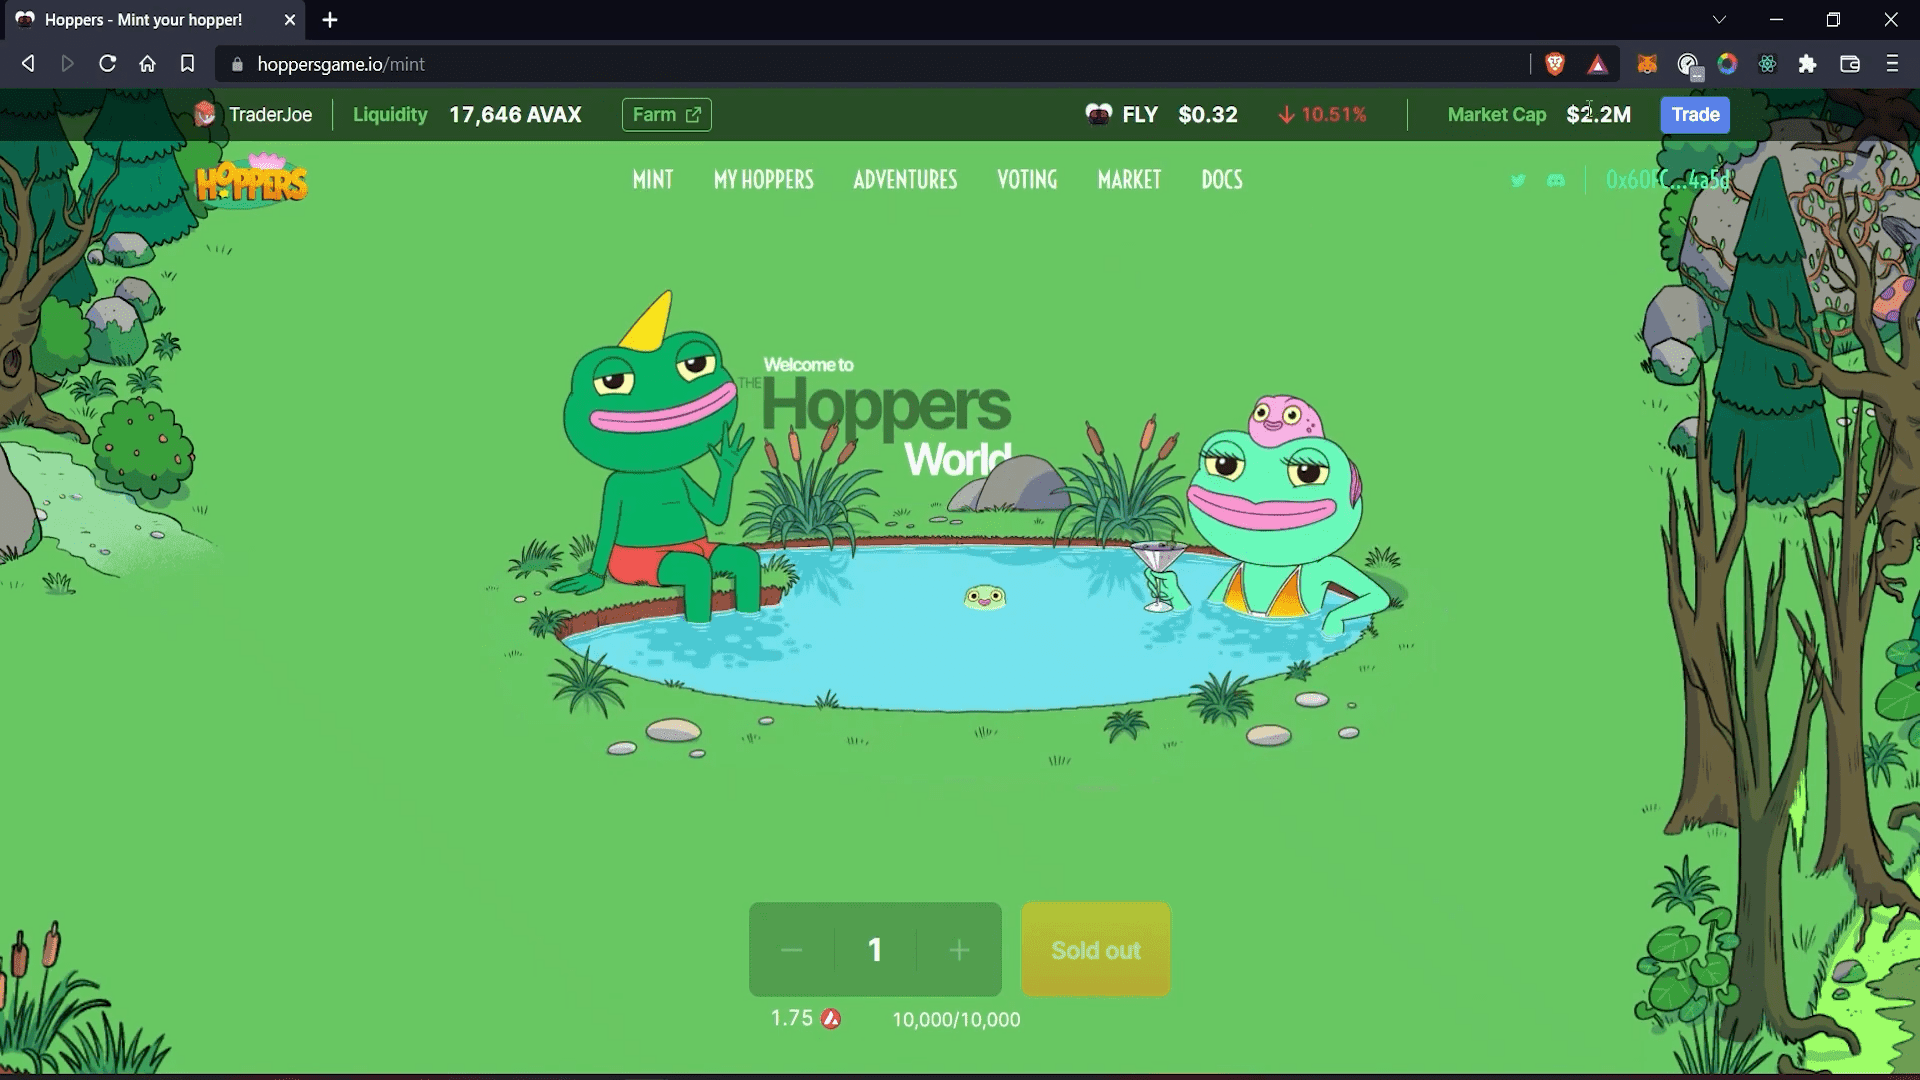 Hoppers Game NFT Game Hoppers Game is an idle game where players stake their Hopper NFTs in different adventures to earn $FLY.